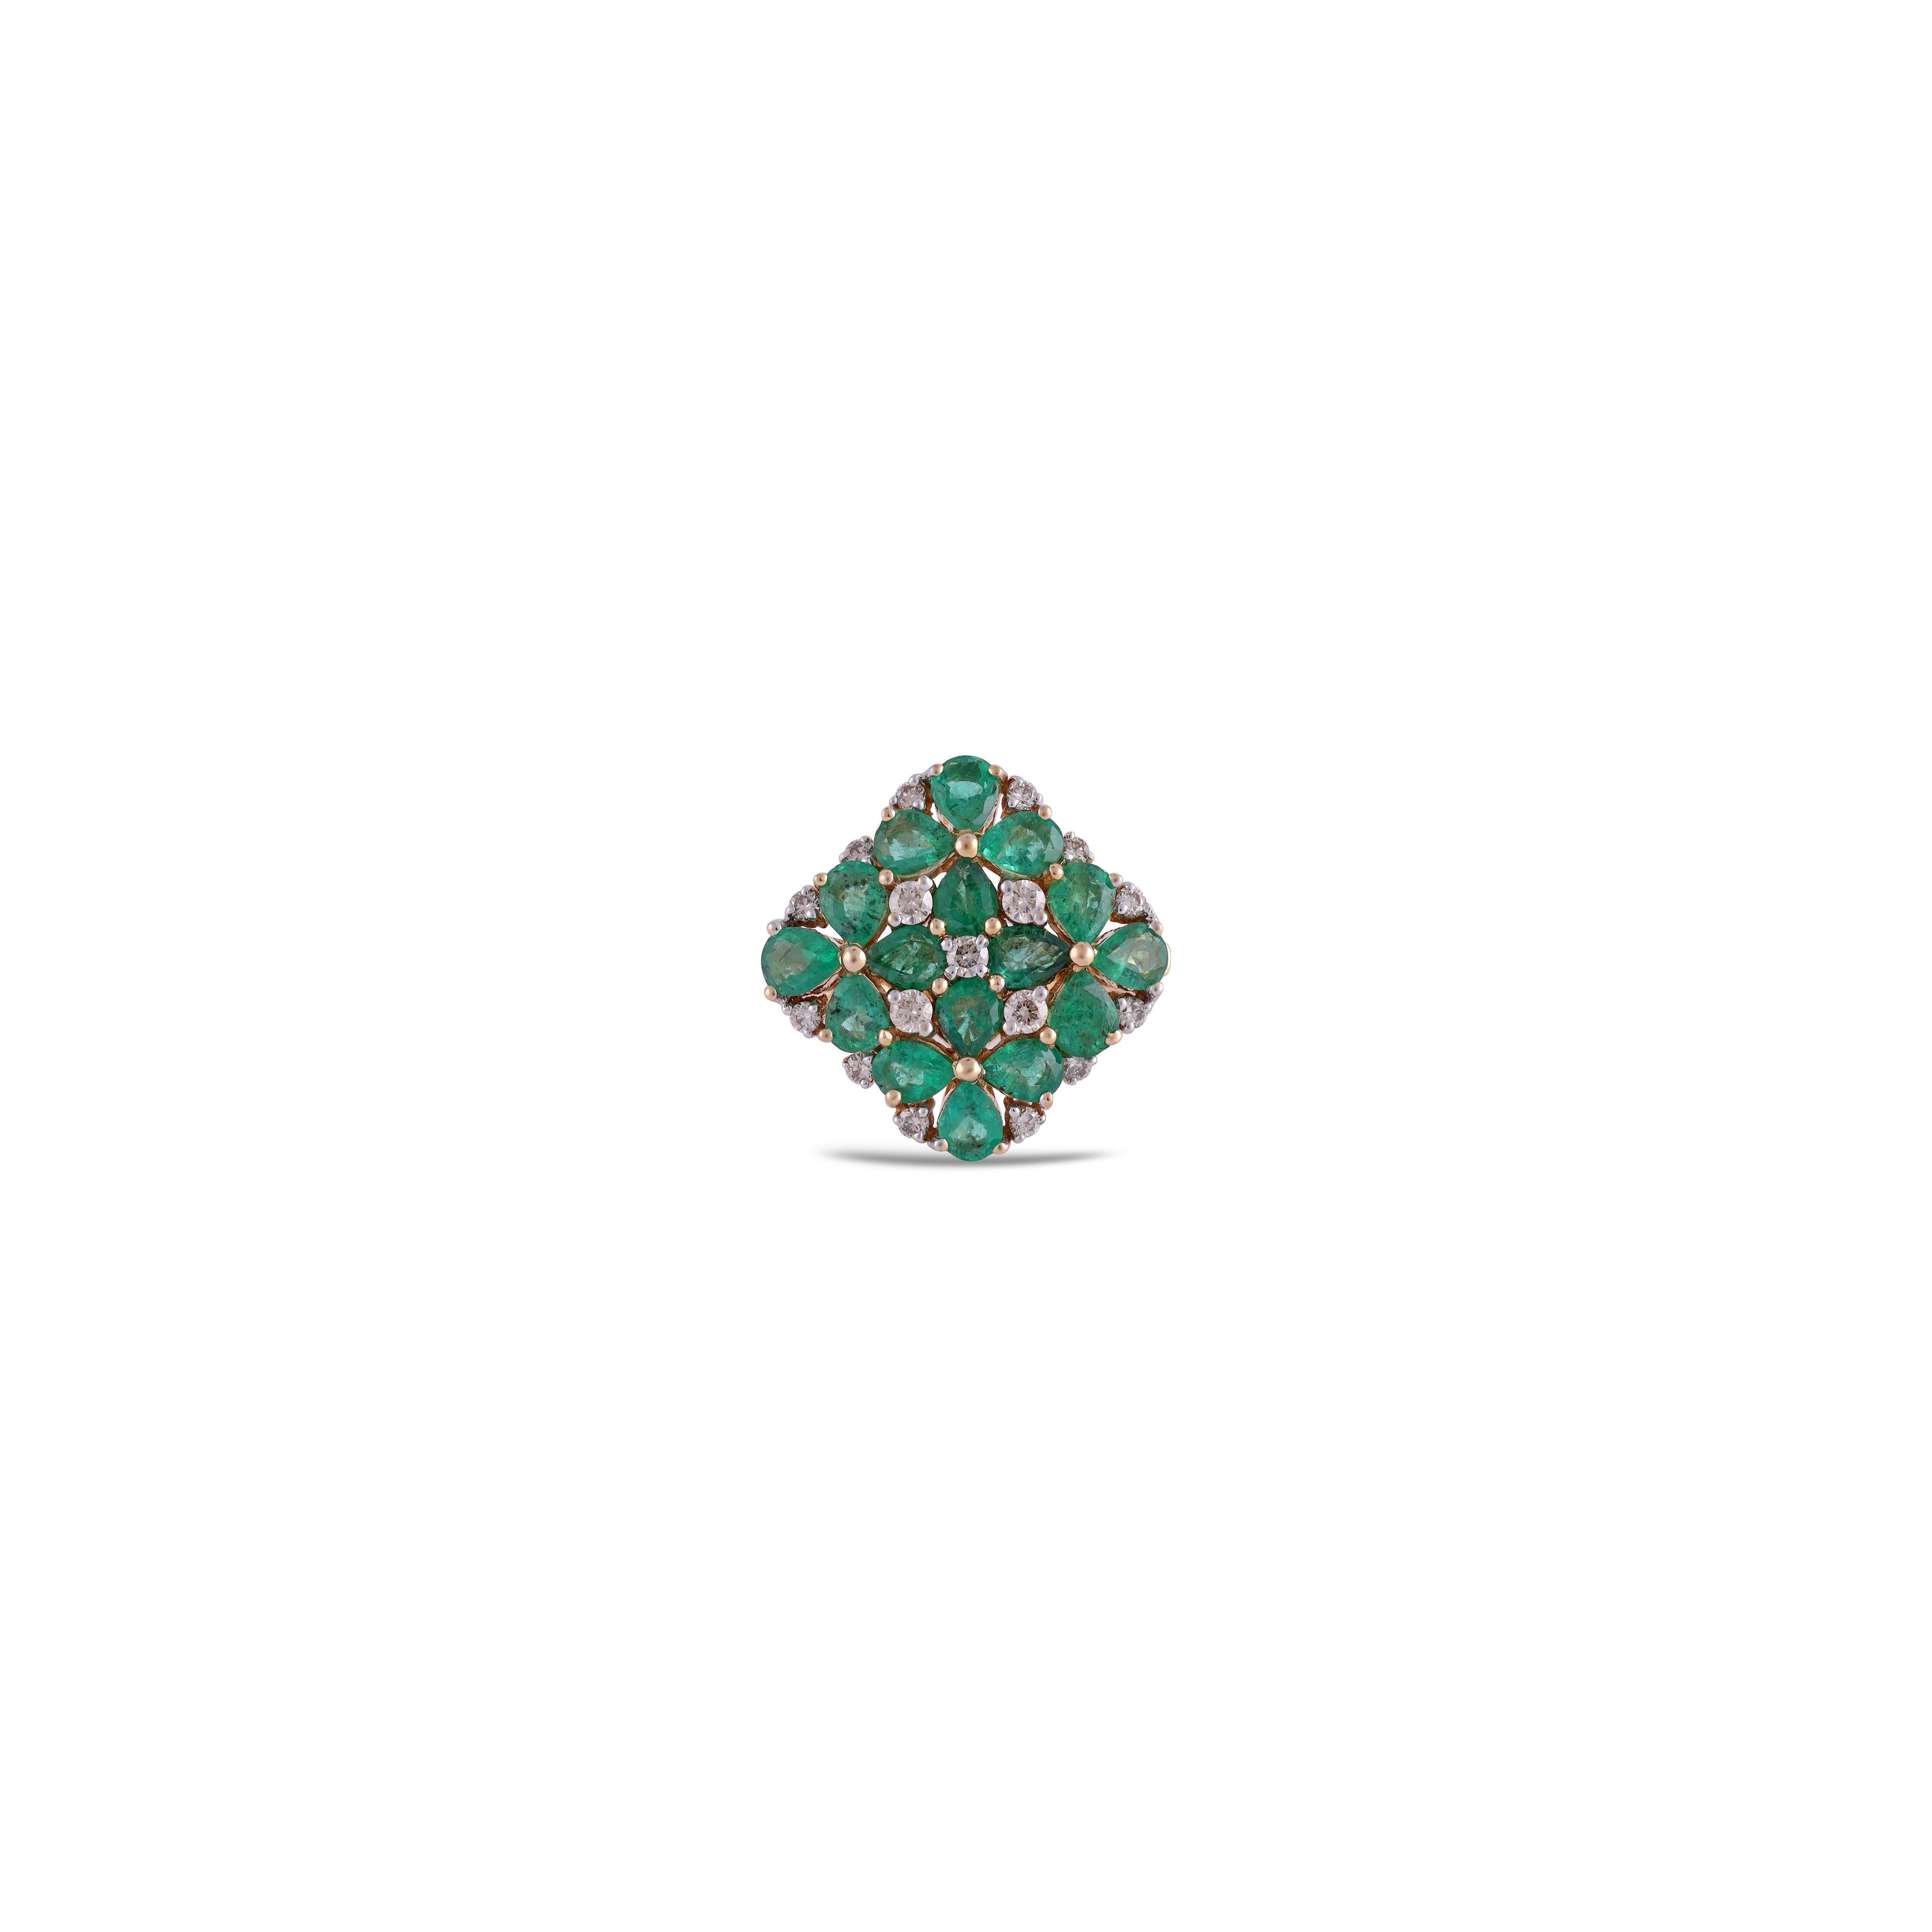 This is an elegant emerald & diamond ring studded in 18k gold with 16 piece of  emerald weight 2.20 carat which is surrounded by 17 pieces of round shaped diamonds weight 0.29 carat with this entire ring studded in 18k  gold 

 Ring size can be